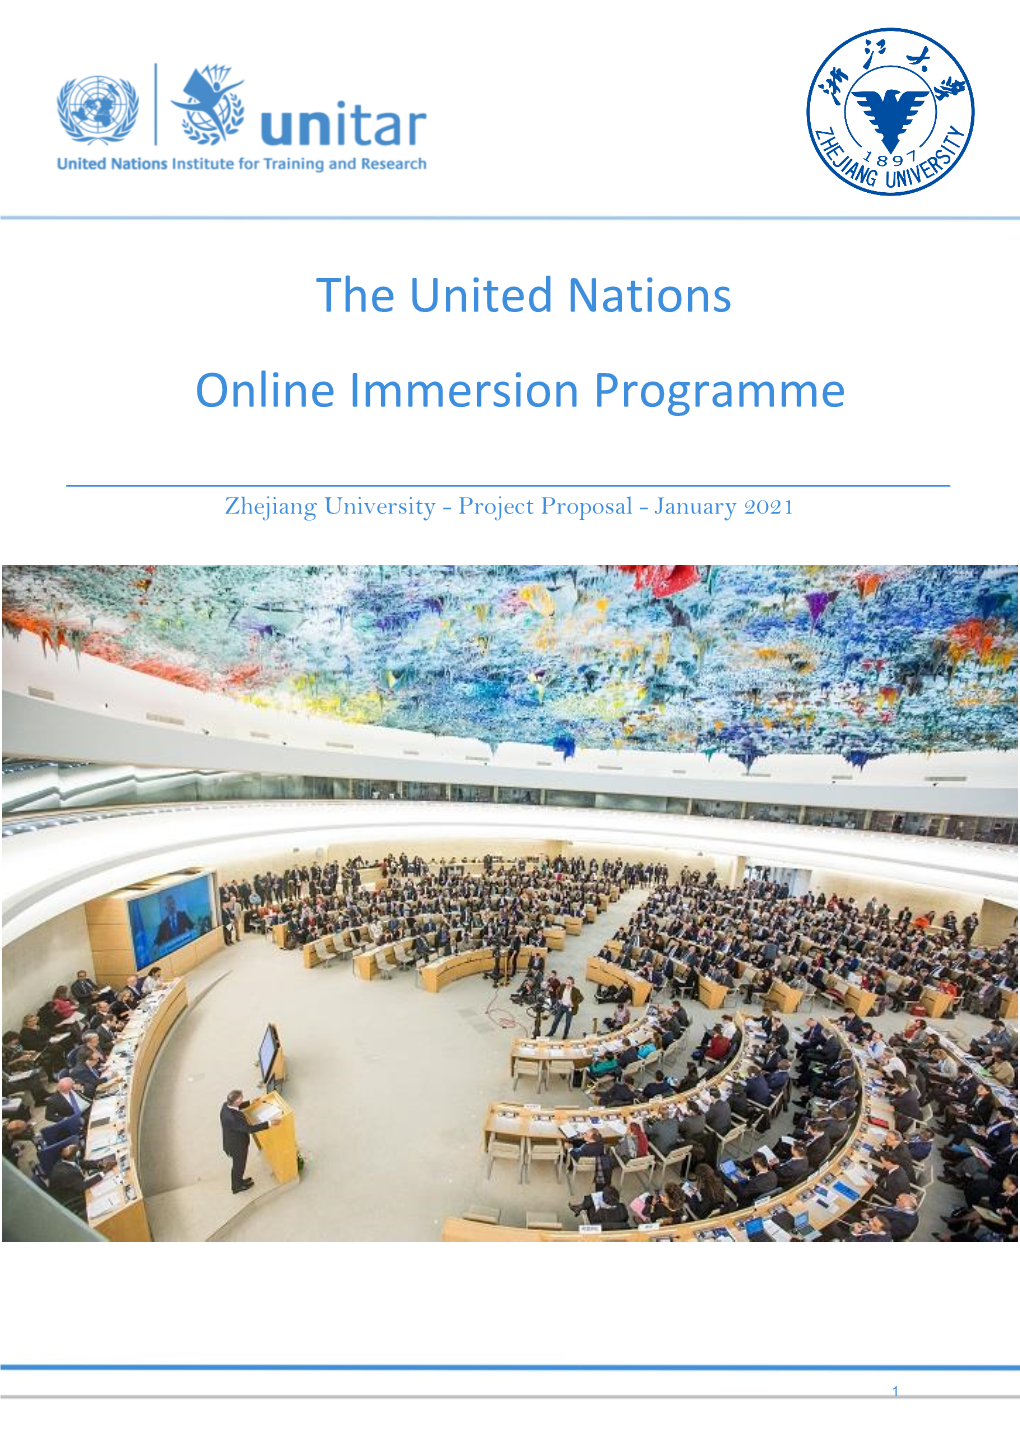 The United Nations Online Immersion Programme